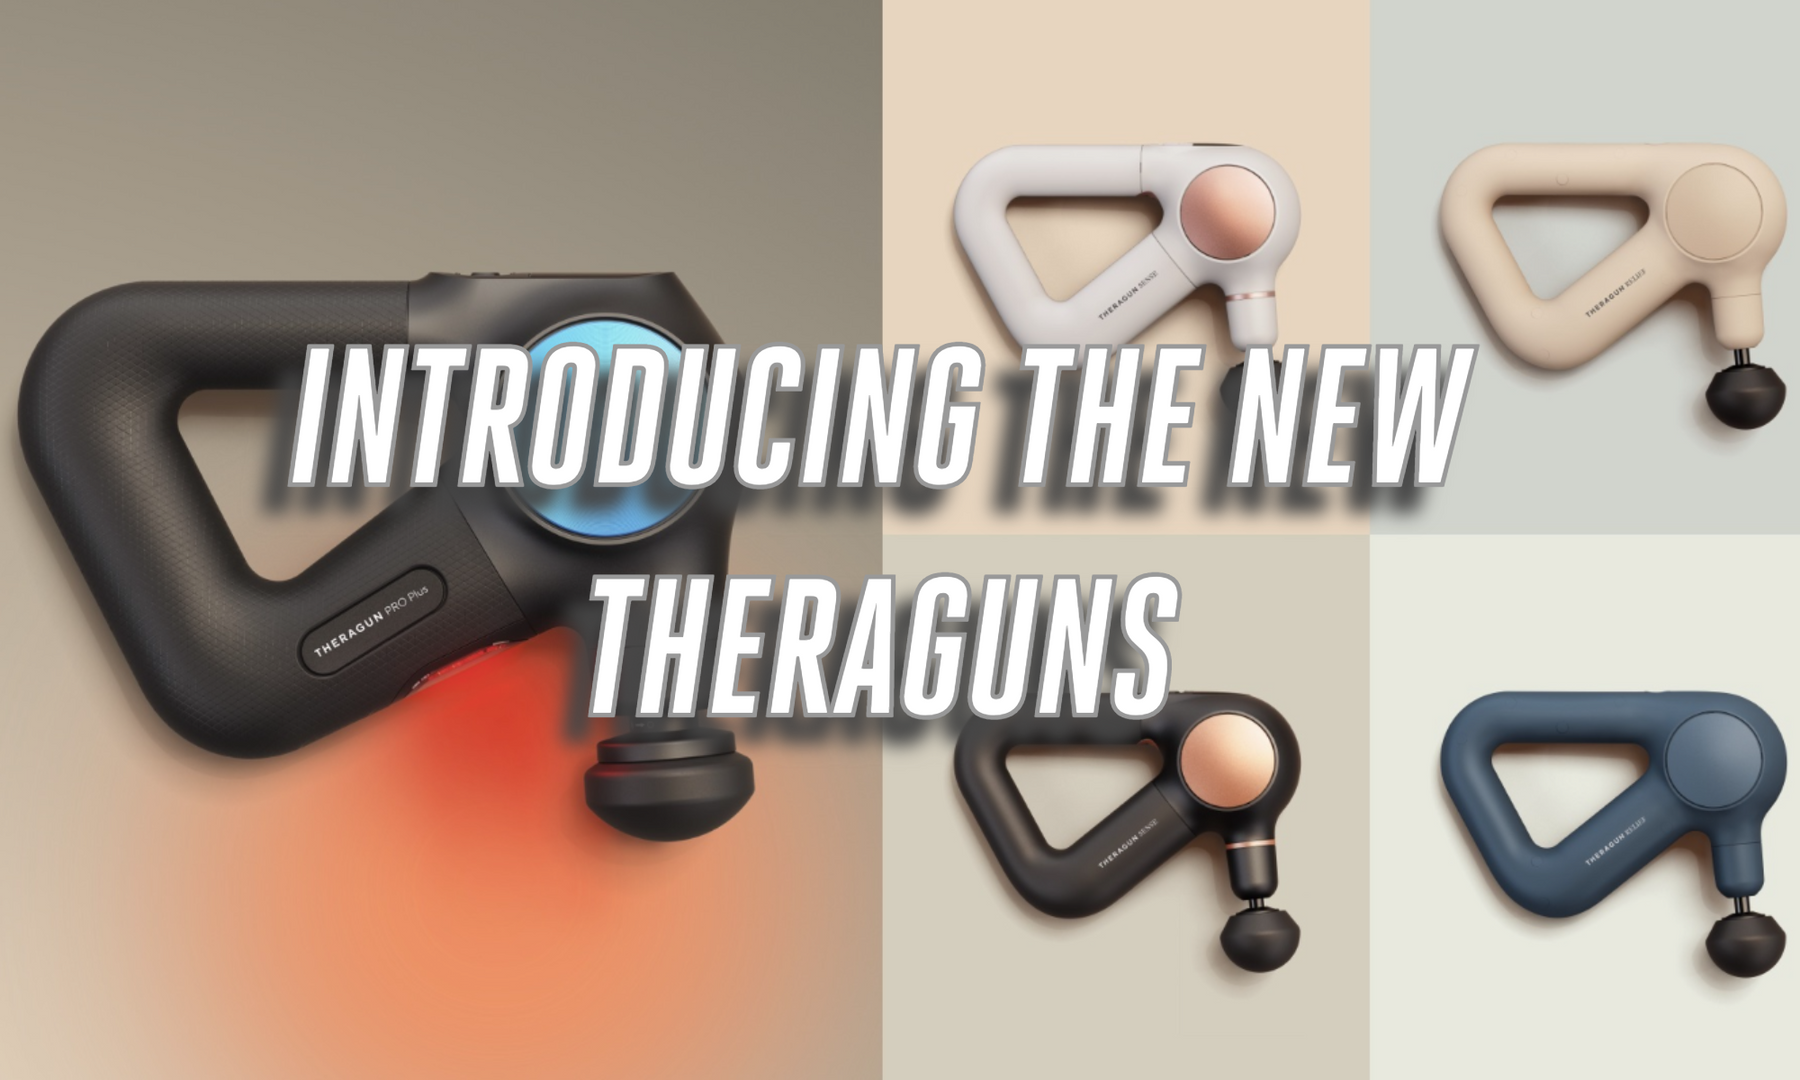 The New Theraguns Have Arrived!